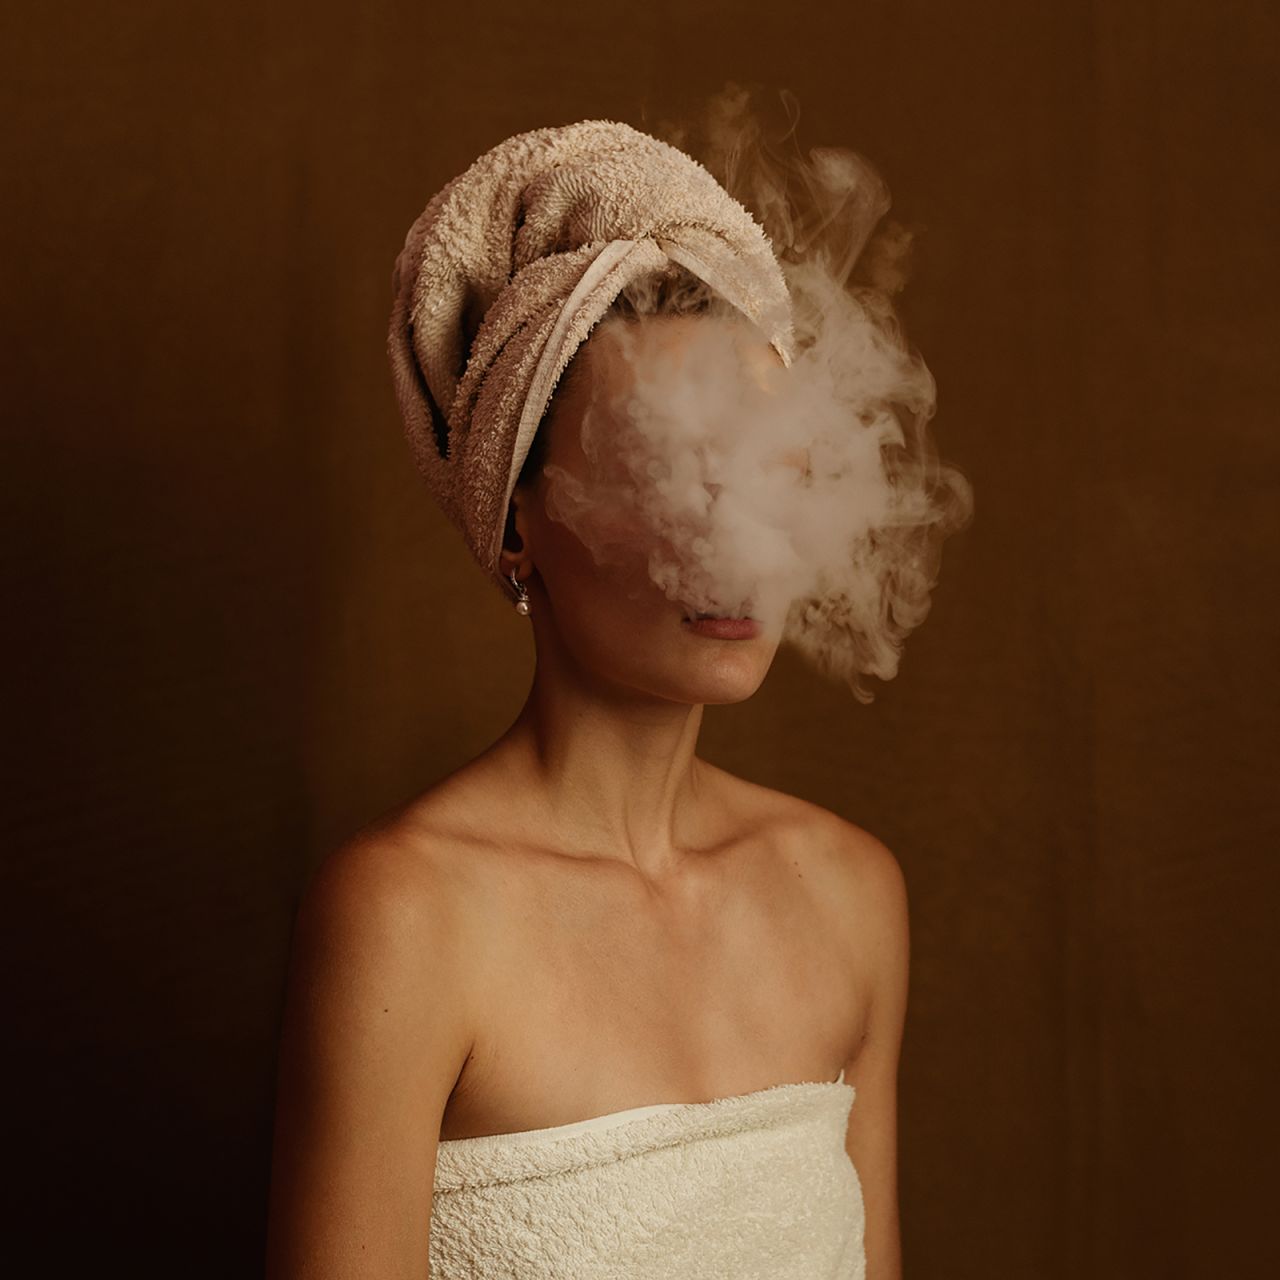 Greek photographer Foteini Zaglara's self portrait, "Rolling Boil," shows her as she blows a plume of smoke into the camera. 